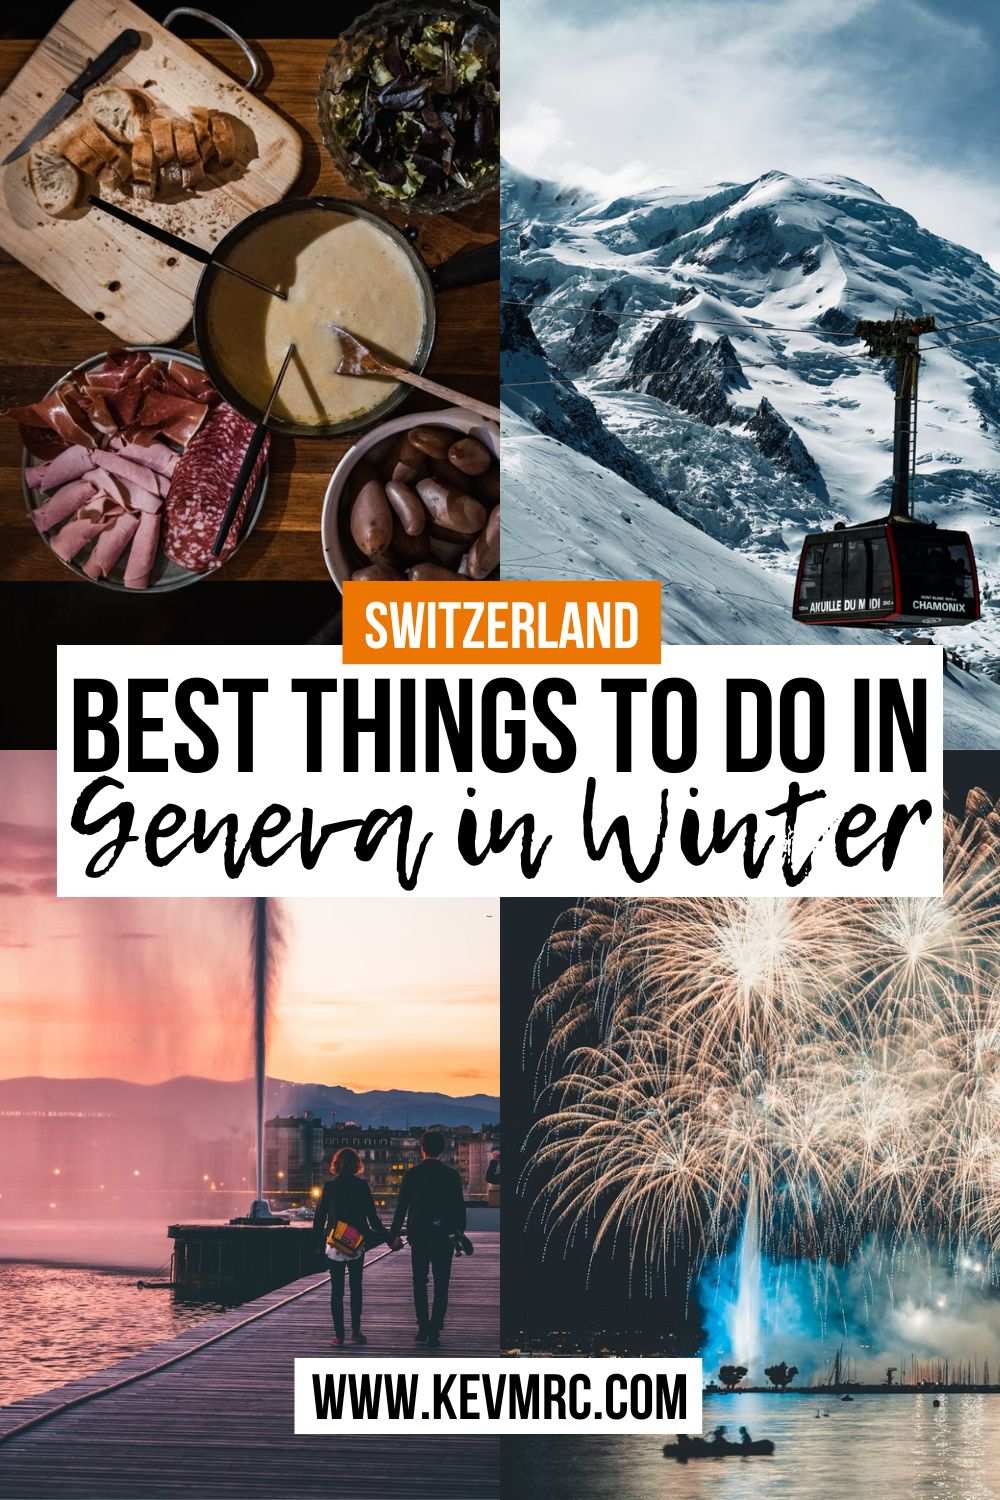 Visiting Geneva in winter? Find out the best things to do in Geneva in the winter, along with travel tips to make the most of your trip. things to do in geneva switzerland | what to do in geneva switzerland | geneva switzerland winter travel